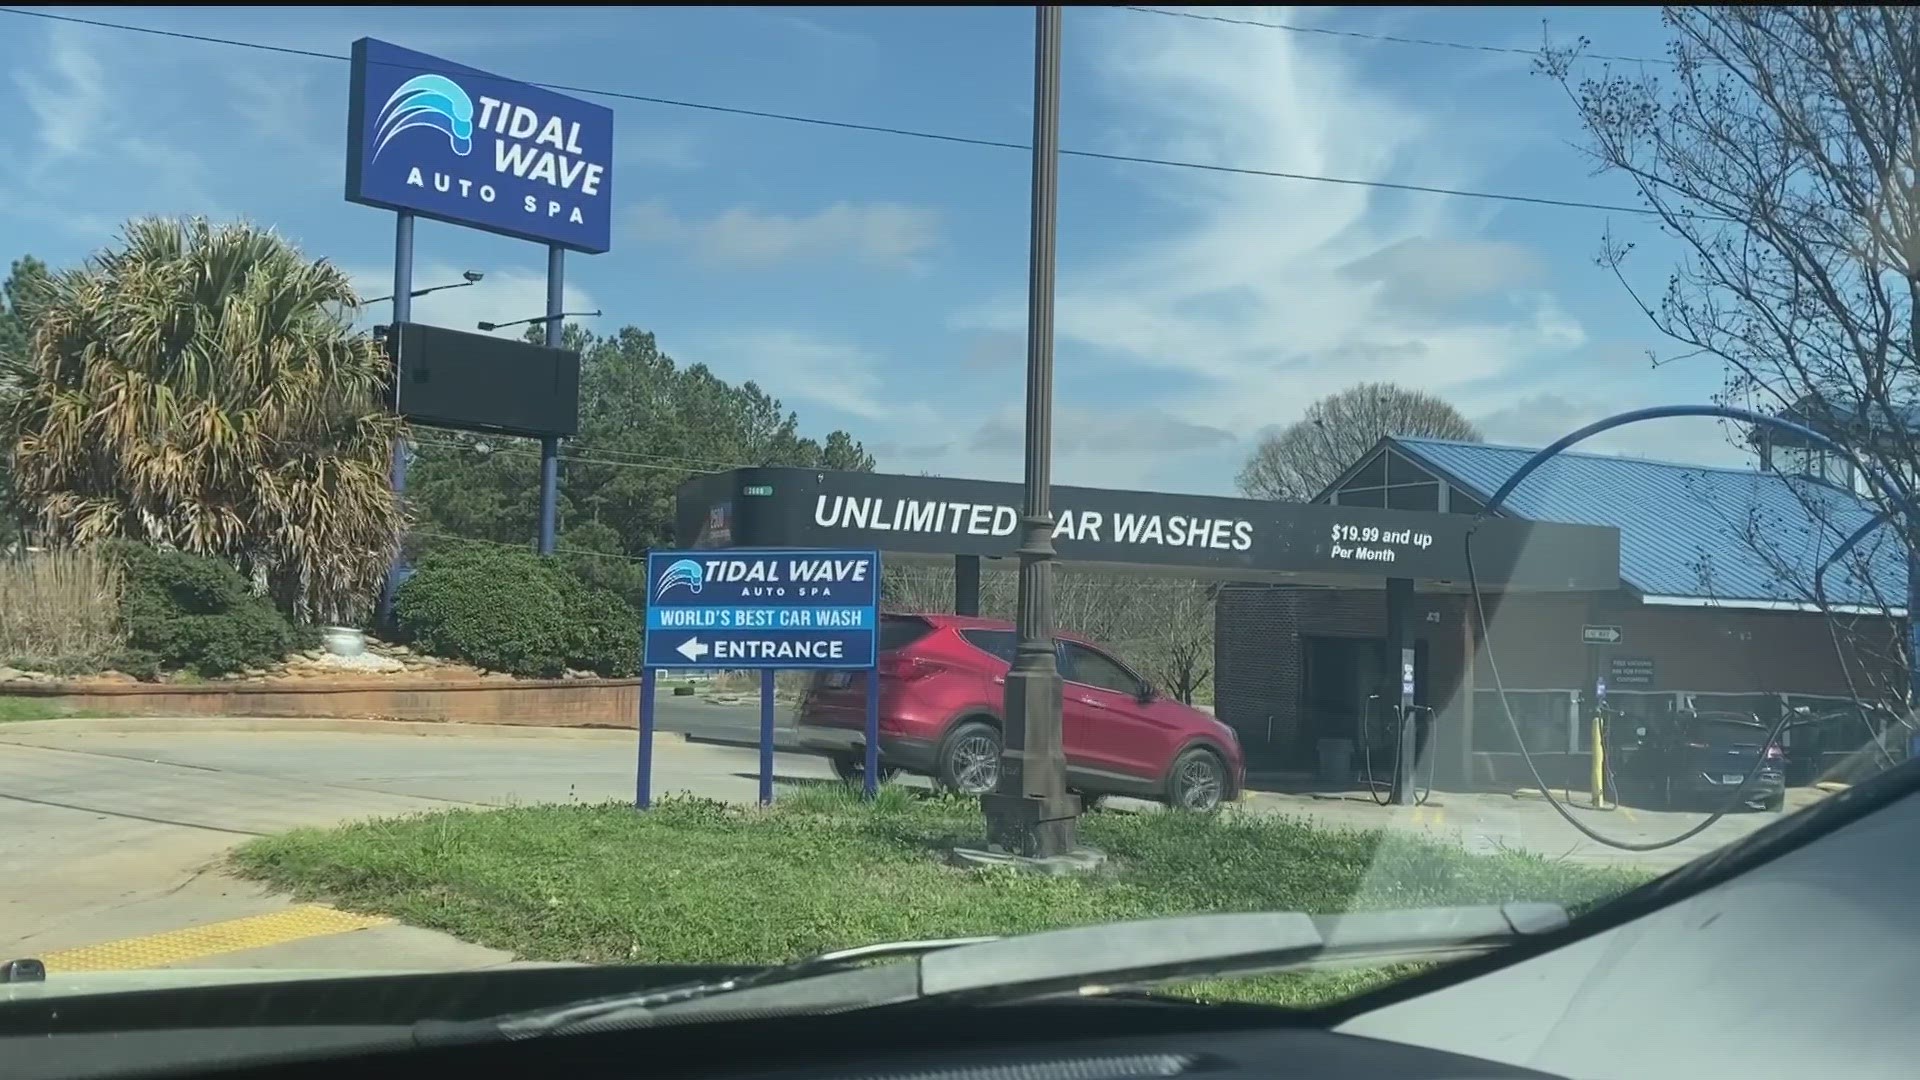 Nicole had just bought her car in September but said when she got it washed at the Tidal Wave Auto Spa in Buford on Feb. 1, her car somehow came off the track.